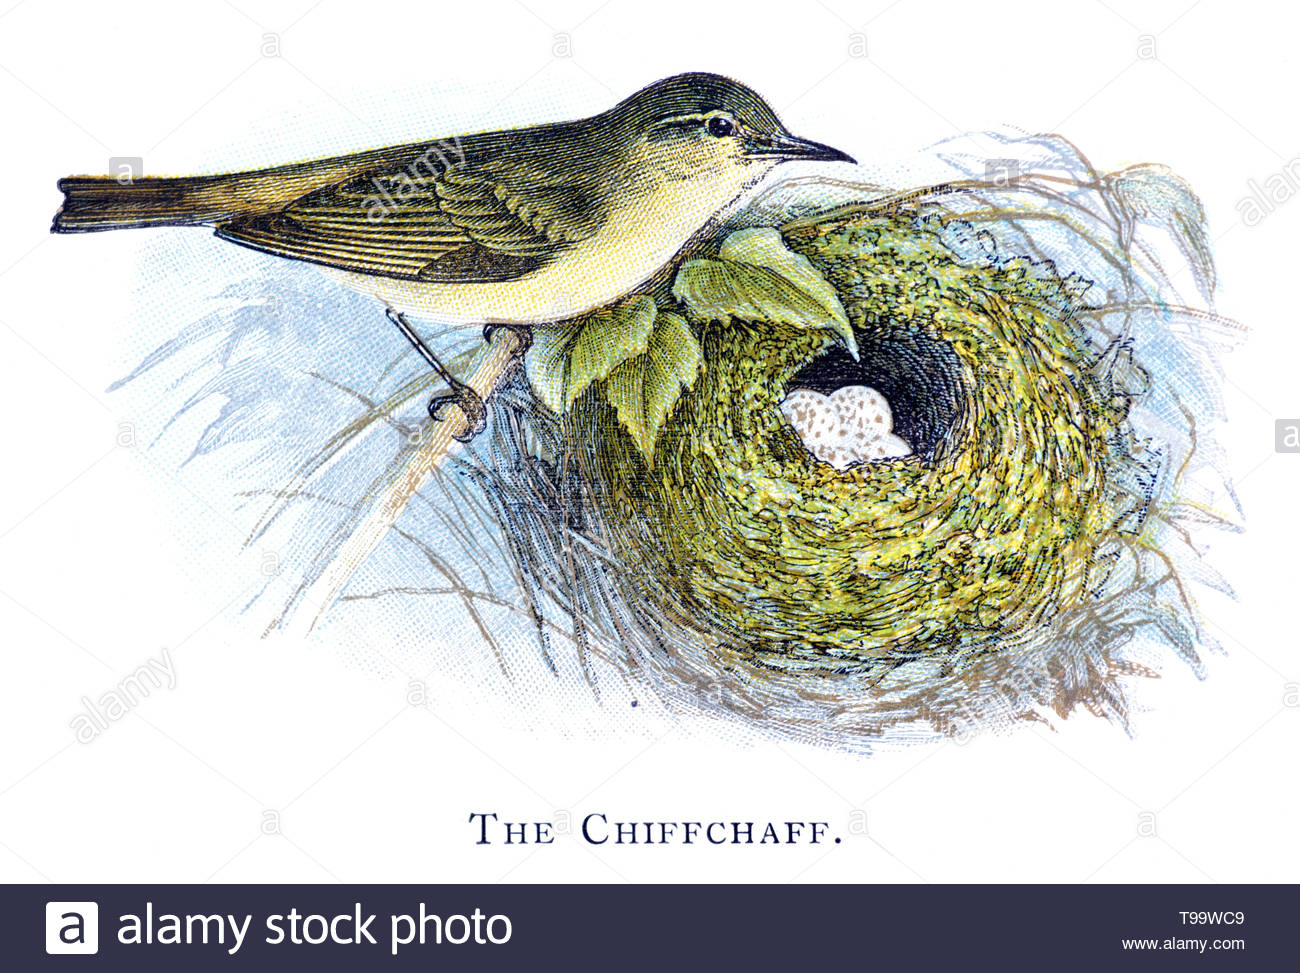 Common Chiffchaff (Phylloscopus collybita) at nest with eggs, vintage illustration published in 1898 Stock Photo